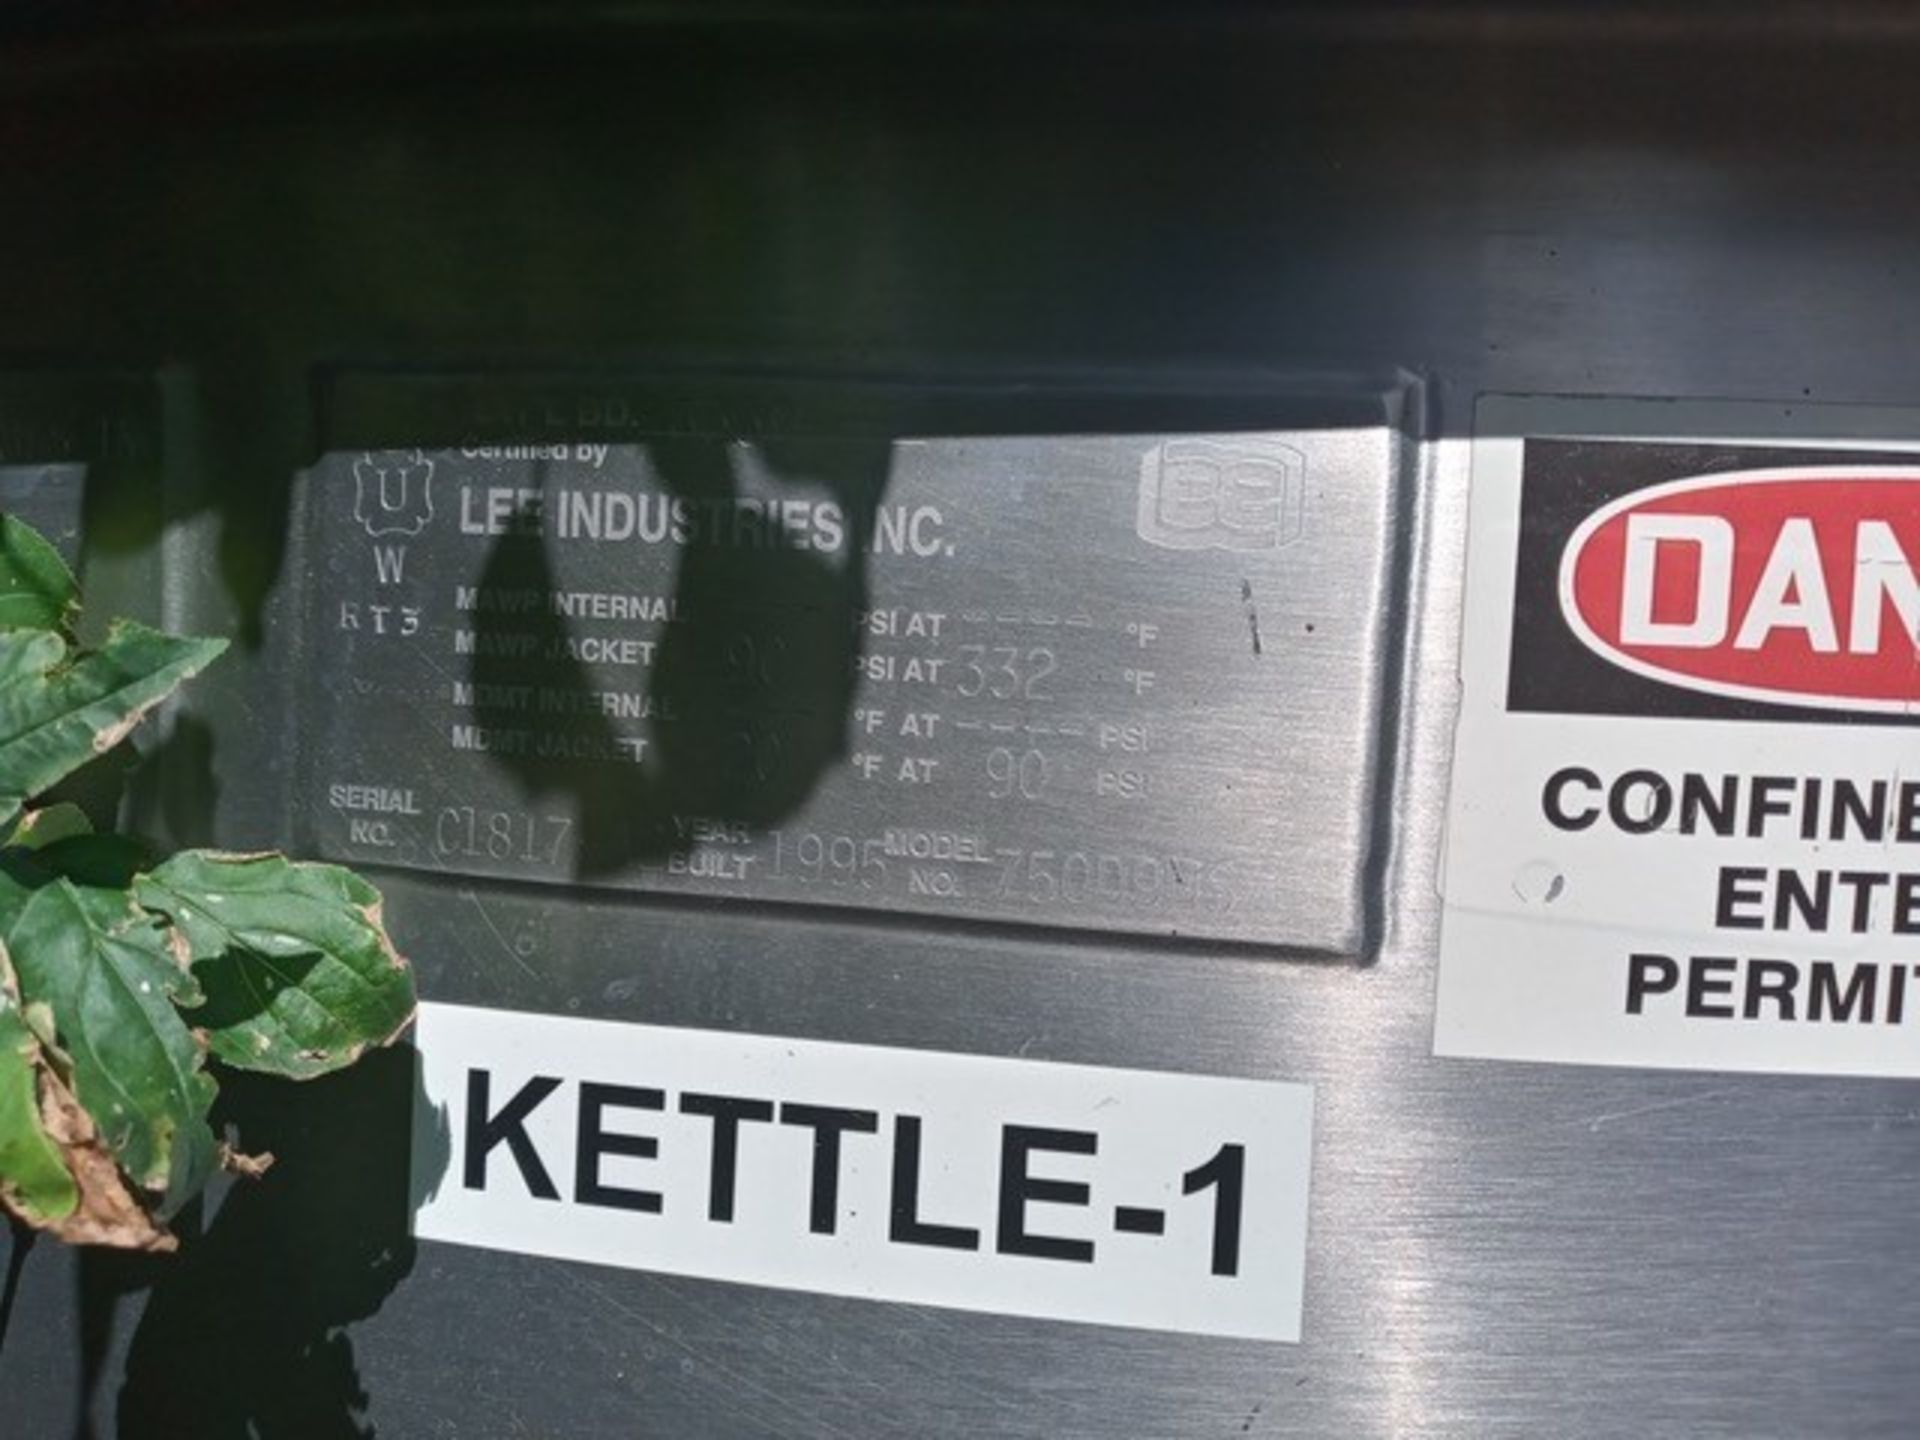 Lee 750 Gal. S/S Steam Jacketed Kettle, Model 750D9MS, S/N C1817, Aprox. Rated at 90 psi (Kettle - - Image 3 of 5